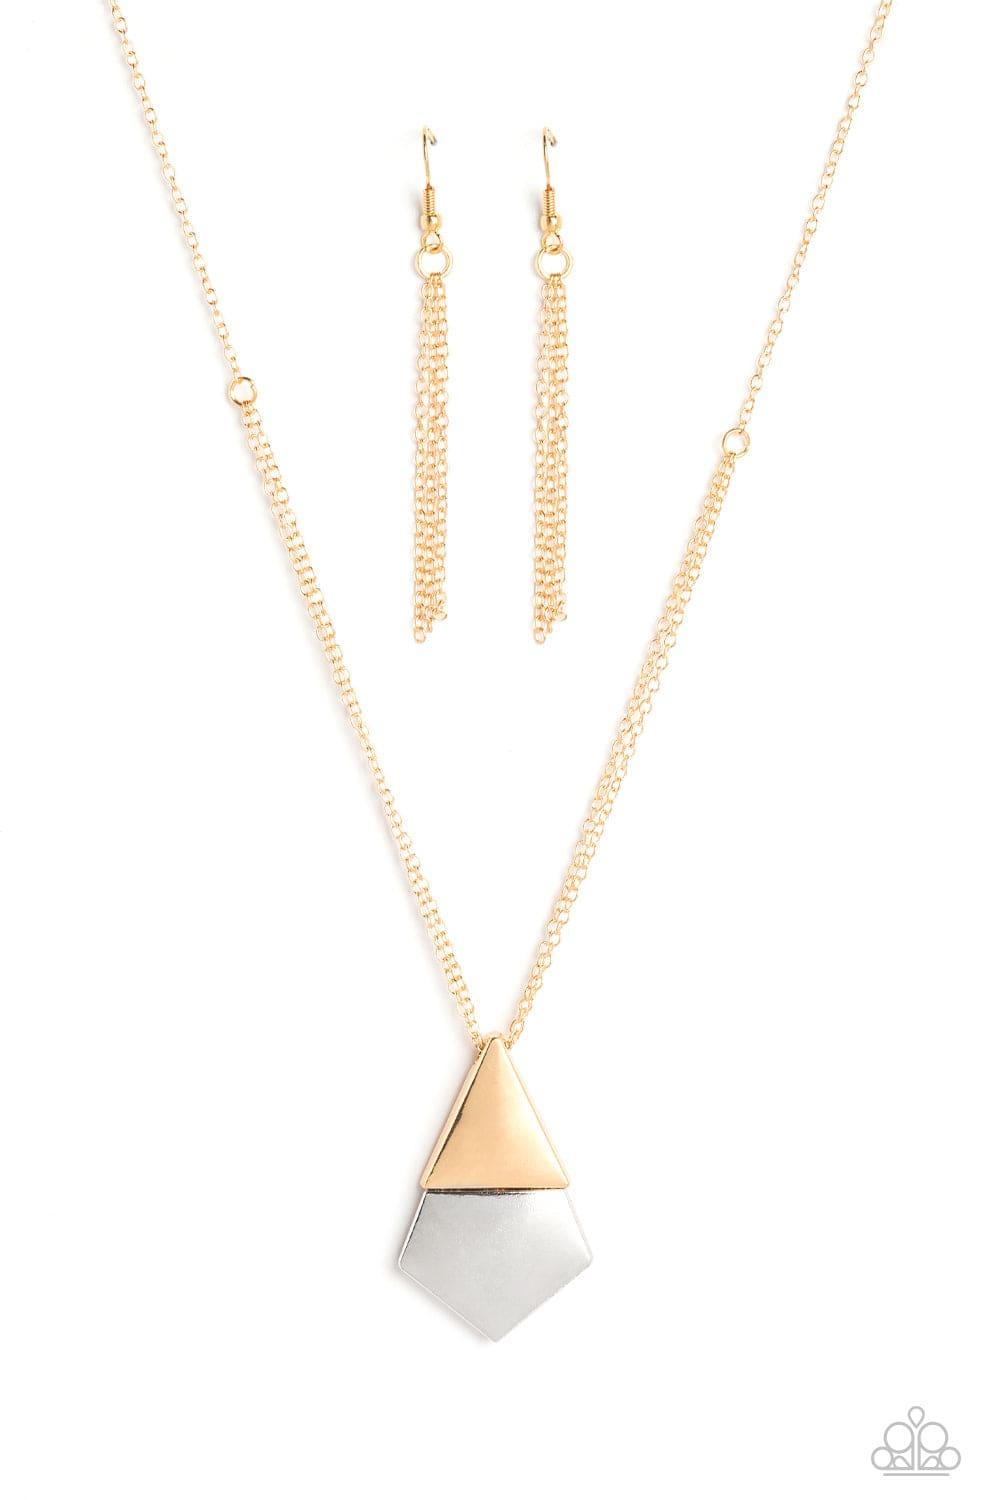 Paparazzi Accessories - Posh Pyramid - Gold Necklace - Bling by JessieK